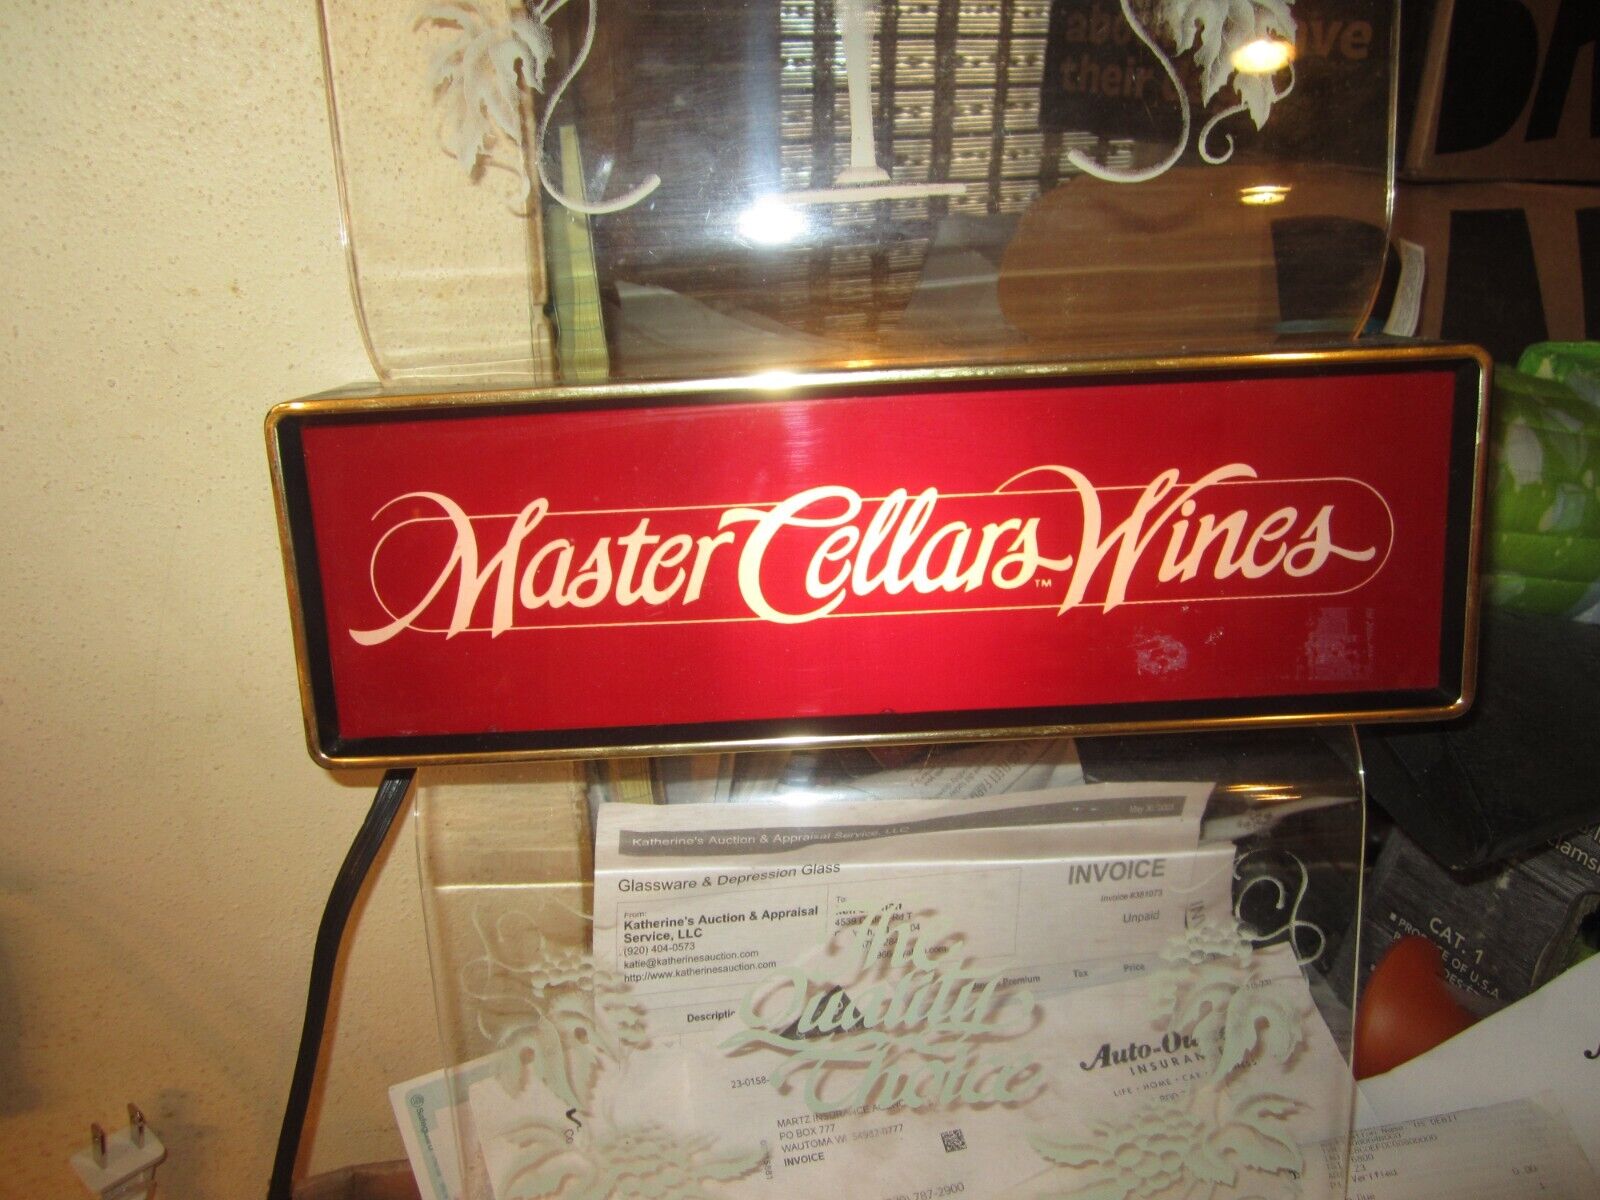 MASTER CELLARS WINES THE QUALITY CHOICE LIGHT UP SIGN ANHEUSER BUSCH WORKS GOOD